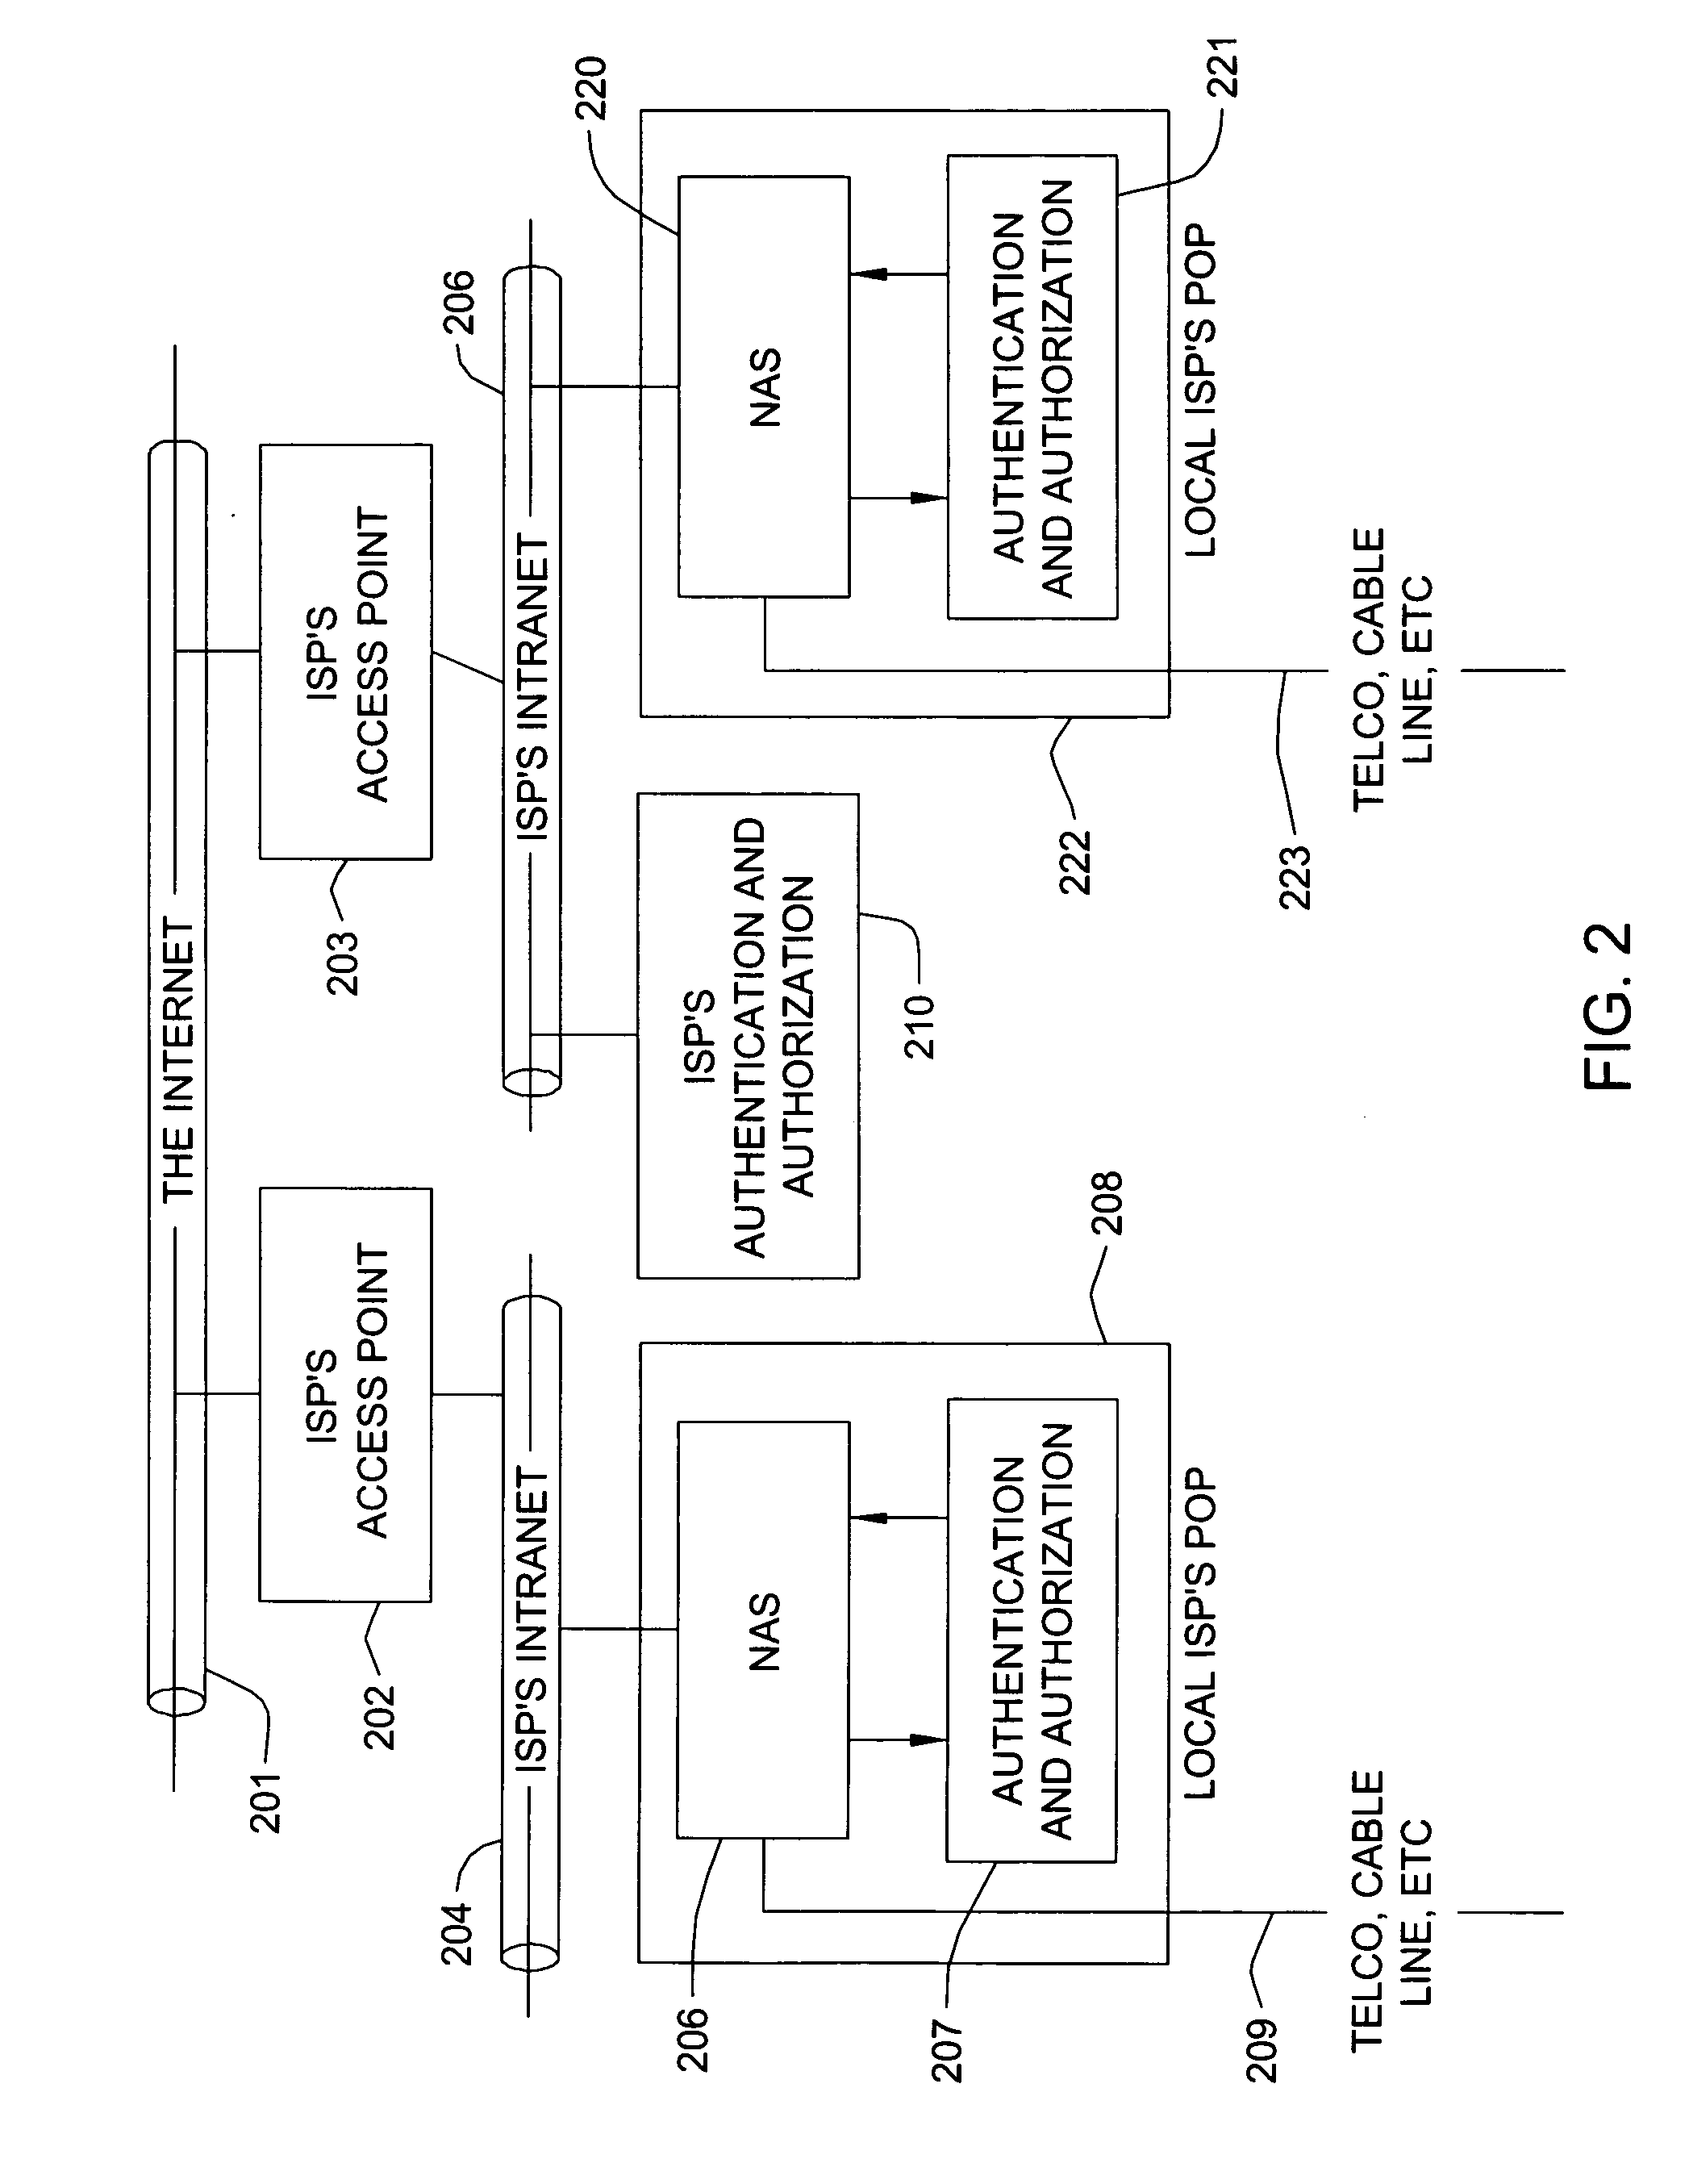 System, method and program for determining a network path by which to send a message